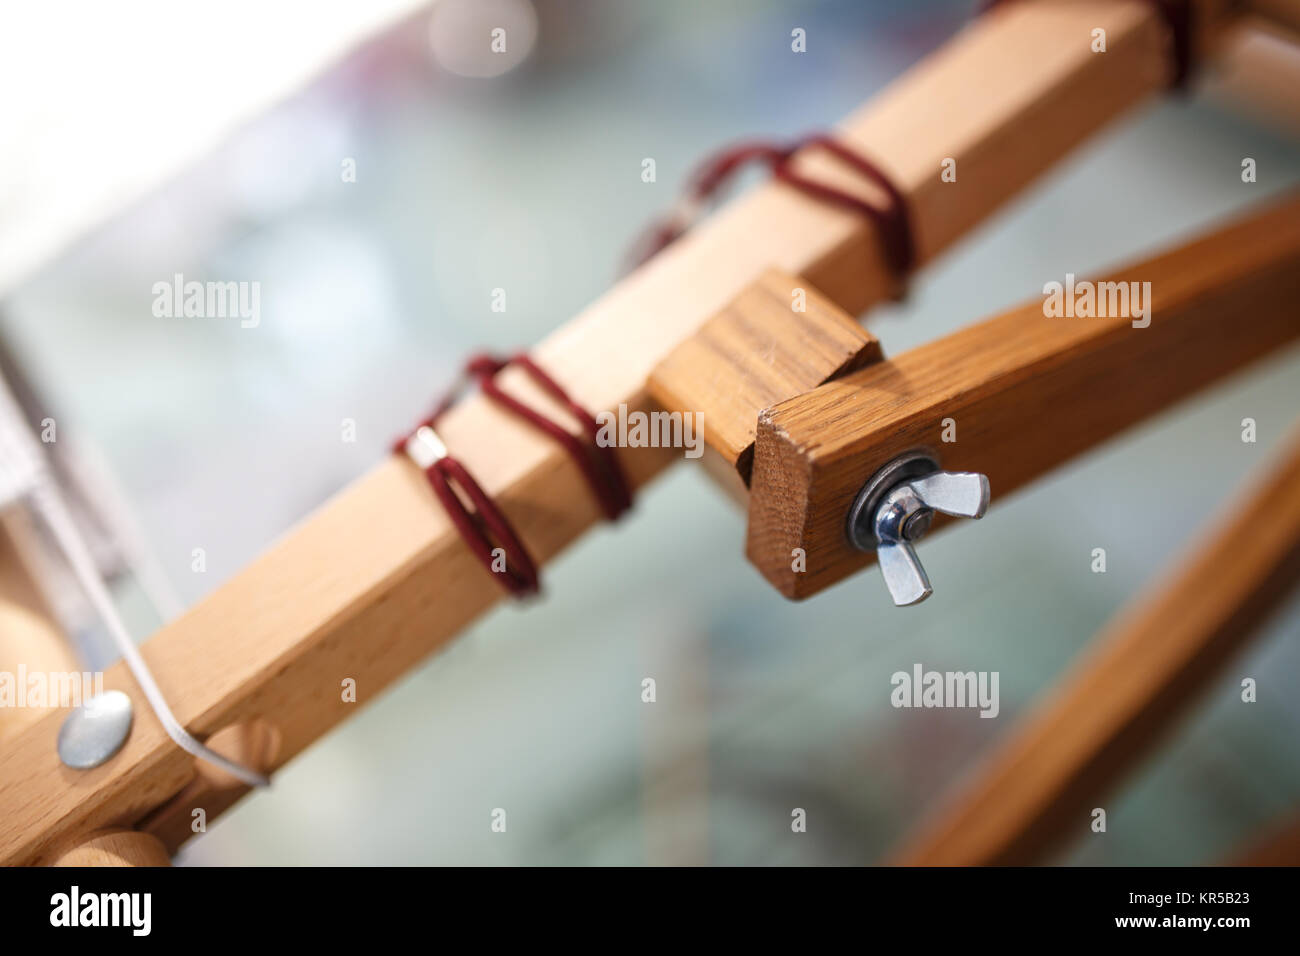 Adjustable solid wood cross stitch rack detail, close up photo. Stock Photo